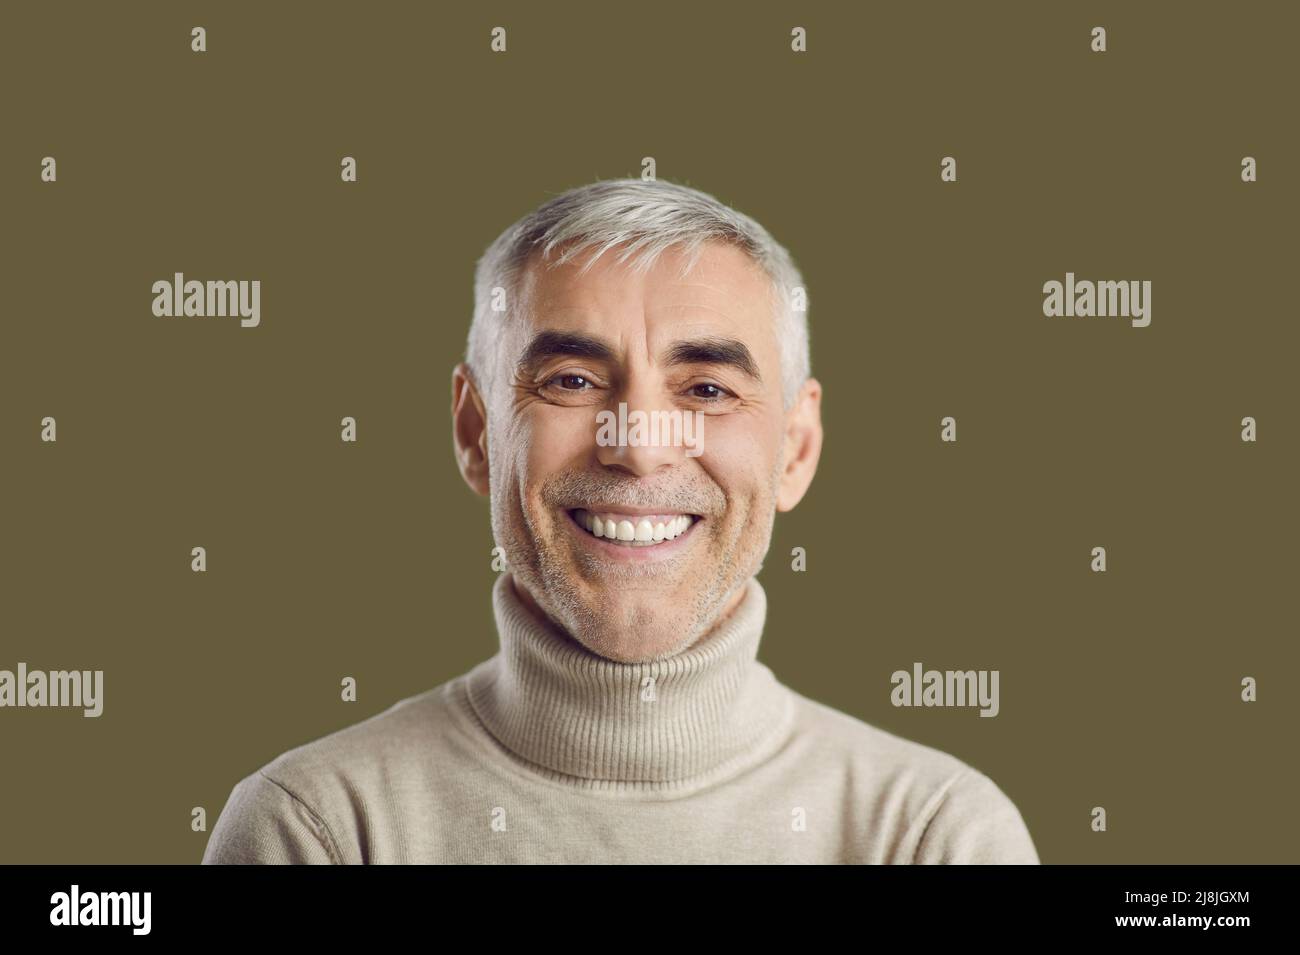 Close up portrait of happy white-haired man with positive sincere smile and friendly expression. Stock Photo